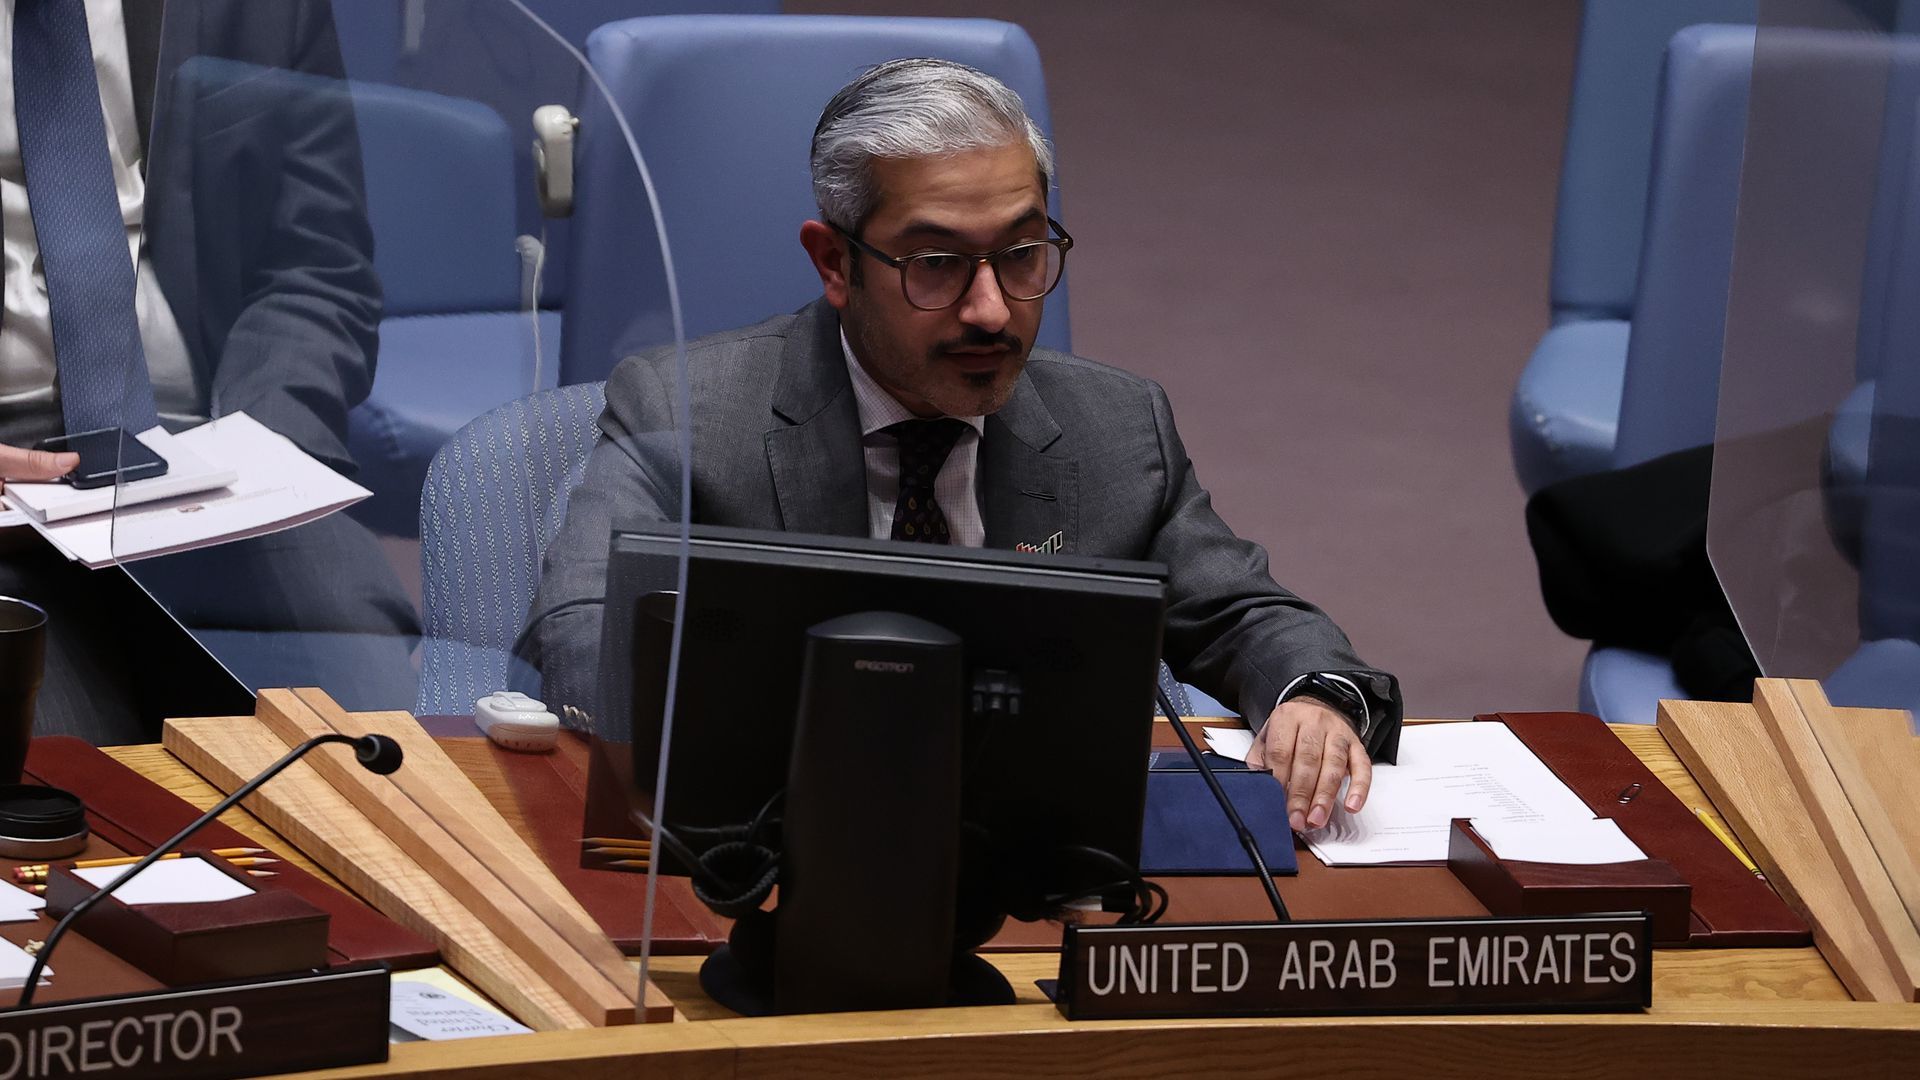 Mohamed Abushahab, the permanent representative of the UAE to the UN, speaks during the UN Security Council meeting on Feb. 28. Photo: Tayfun Coskun/Anadolu Agency via Getty Images